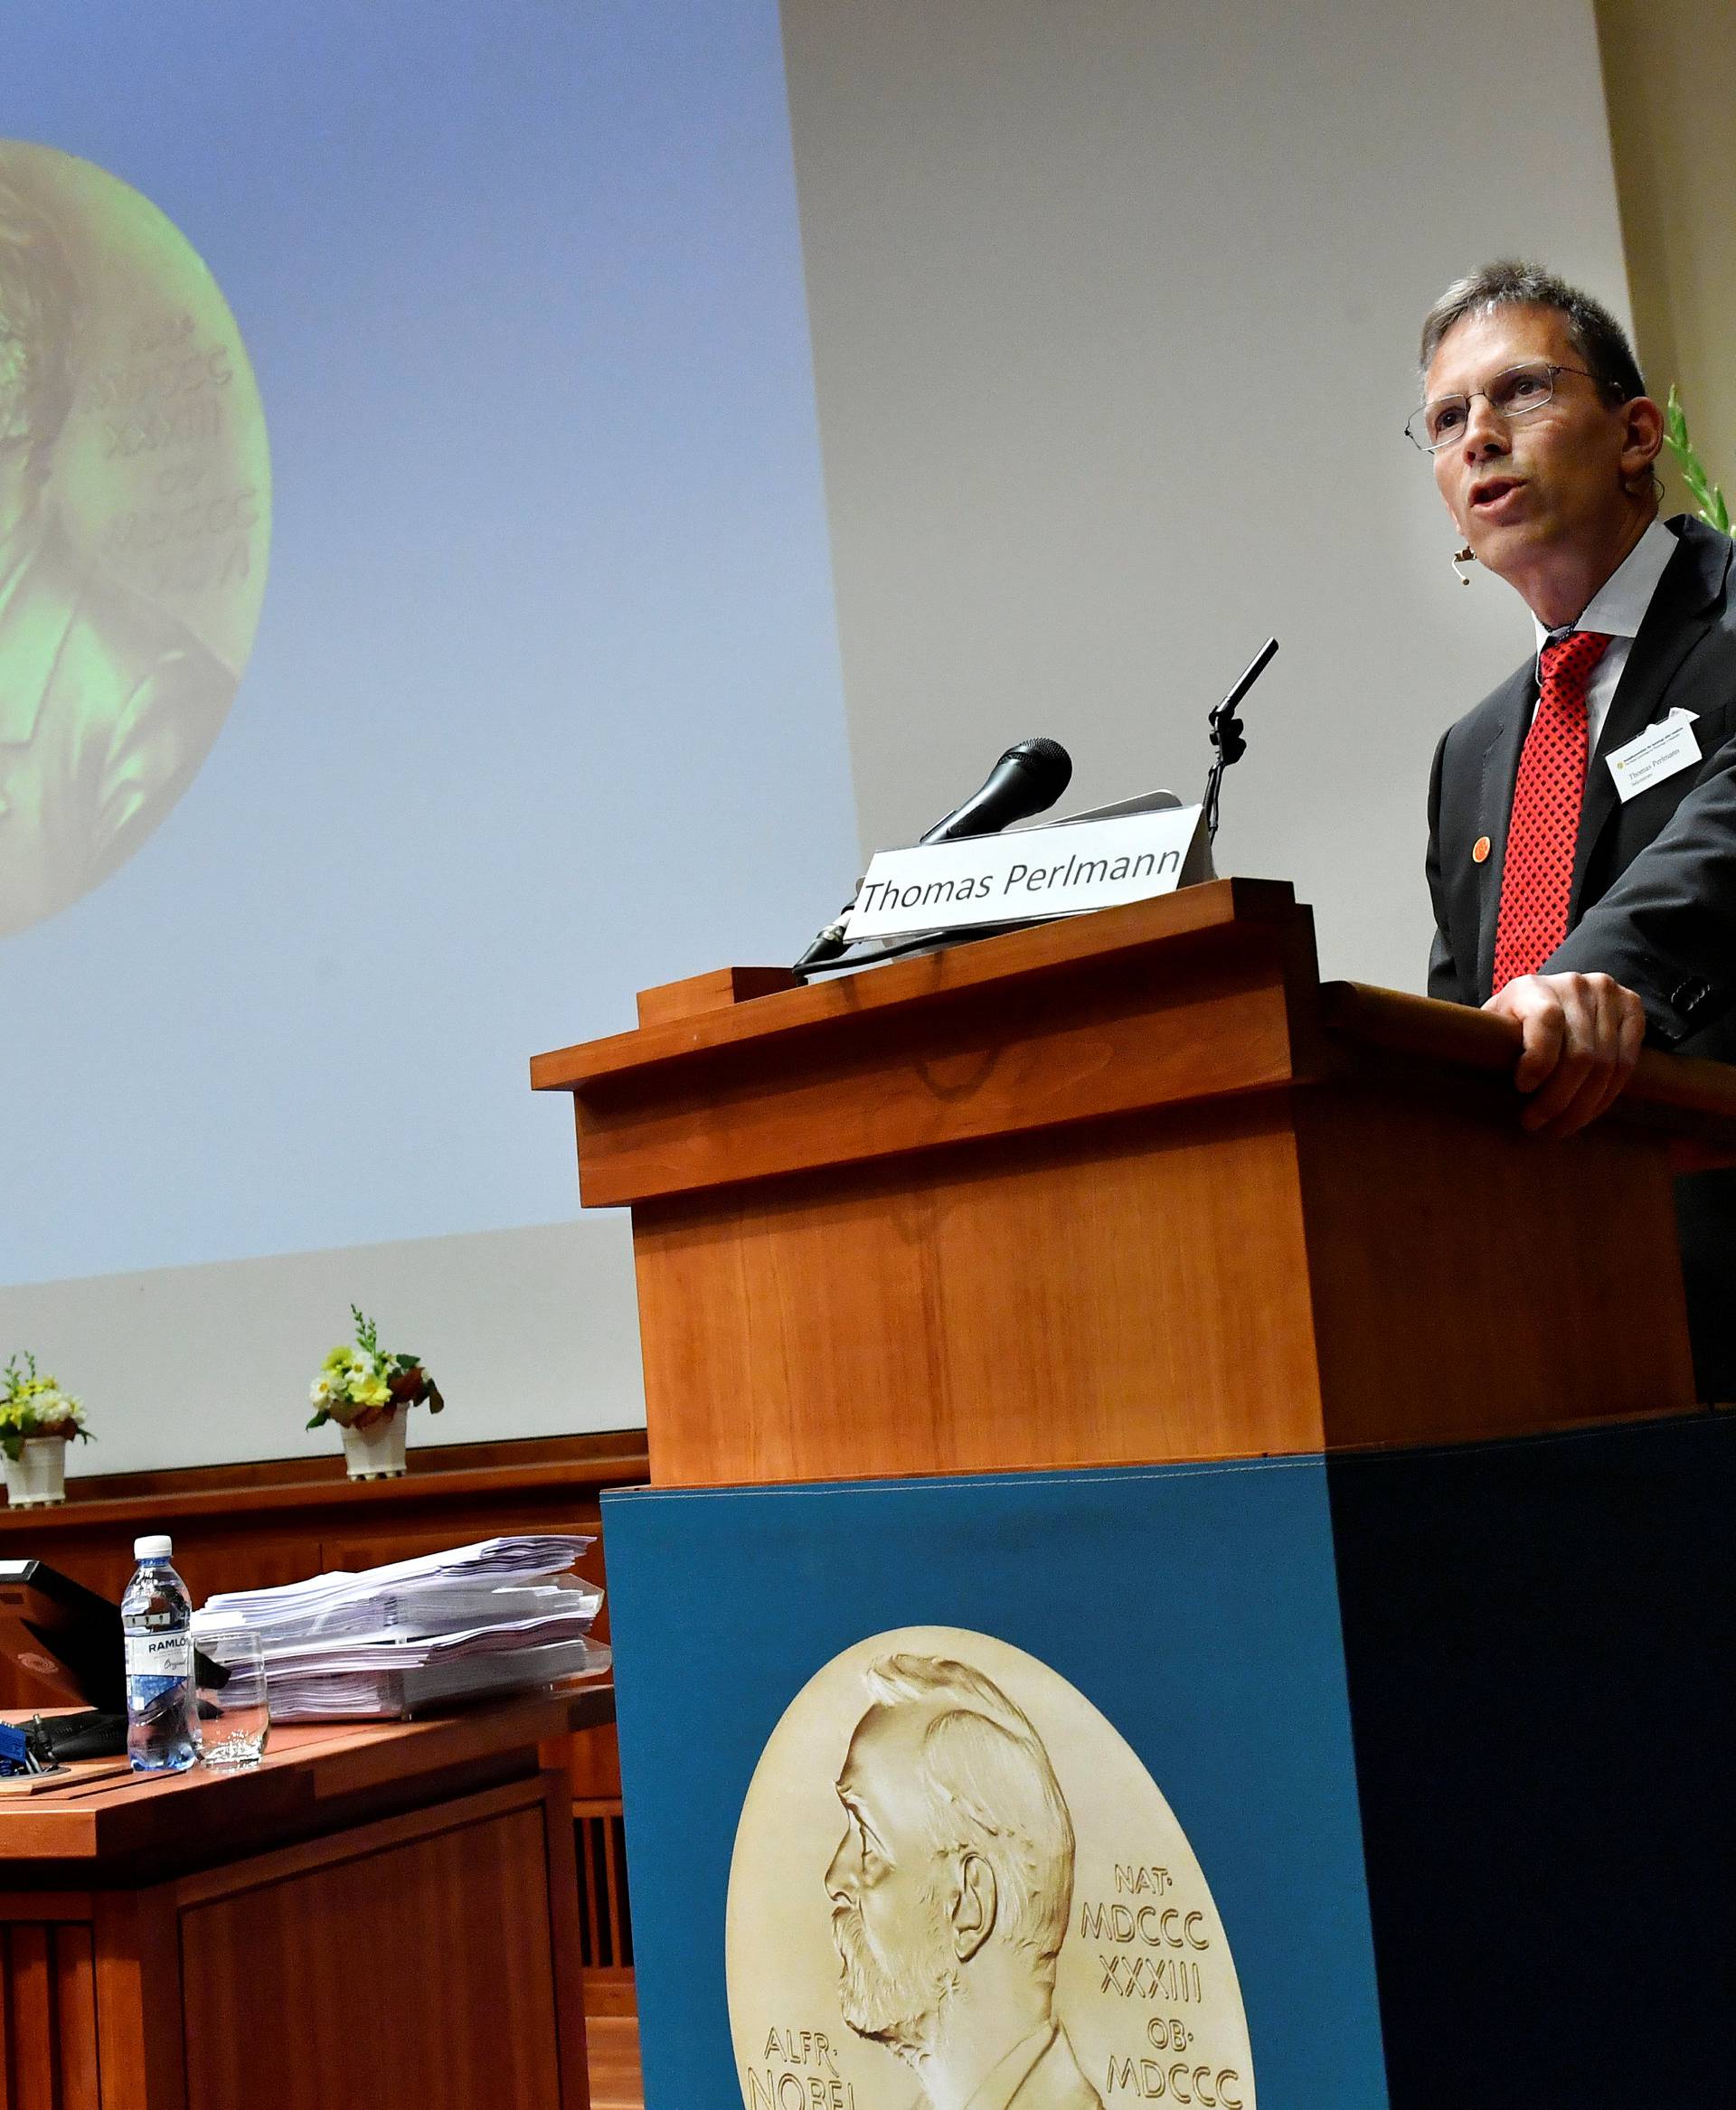 Thomas Perlmann, Secretary of the Nobel Committee for Physiology or Medicine, announces the winners of the 2017 Nobel Prize in Physiology or Medicine during a press conference at the Nobel Forum in Stockholm